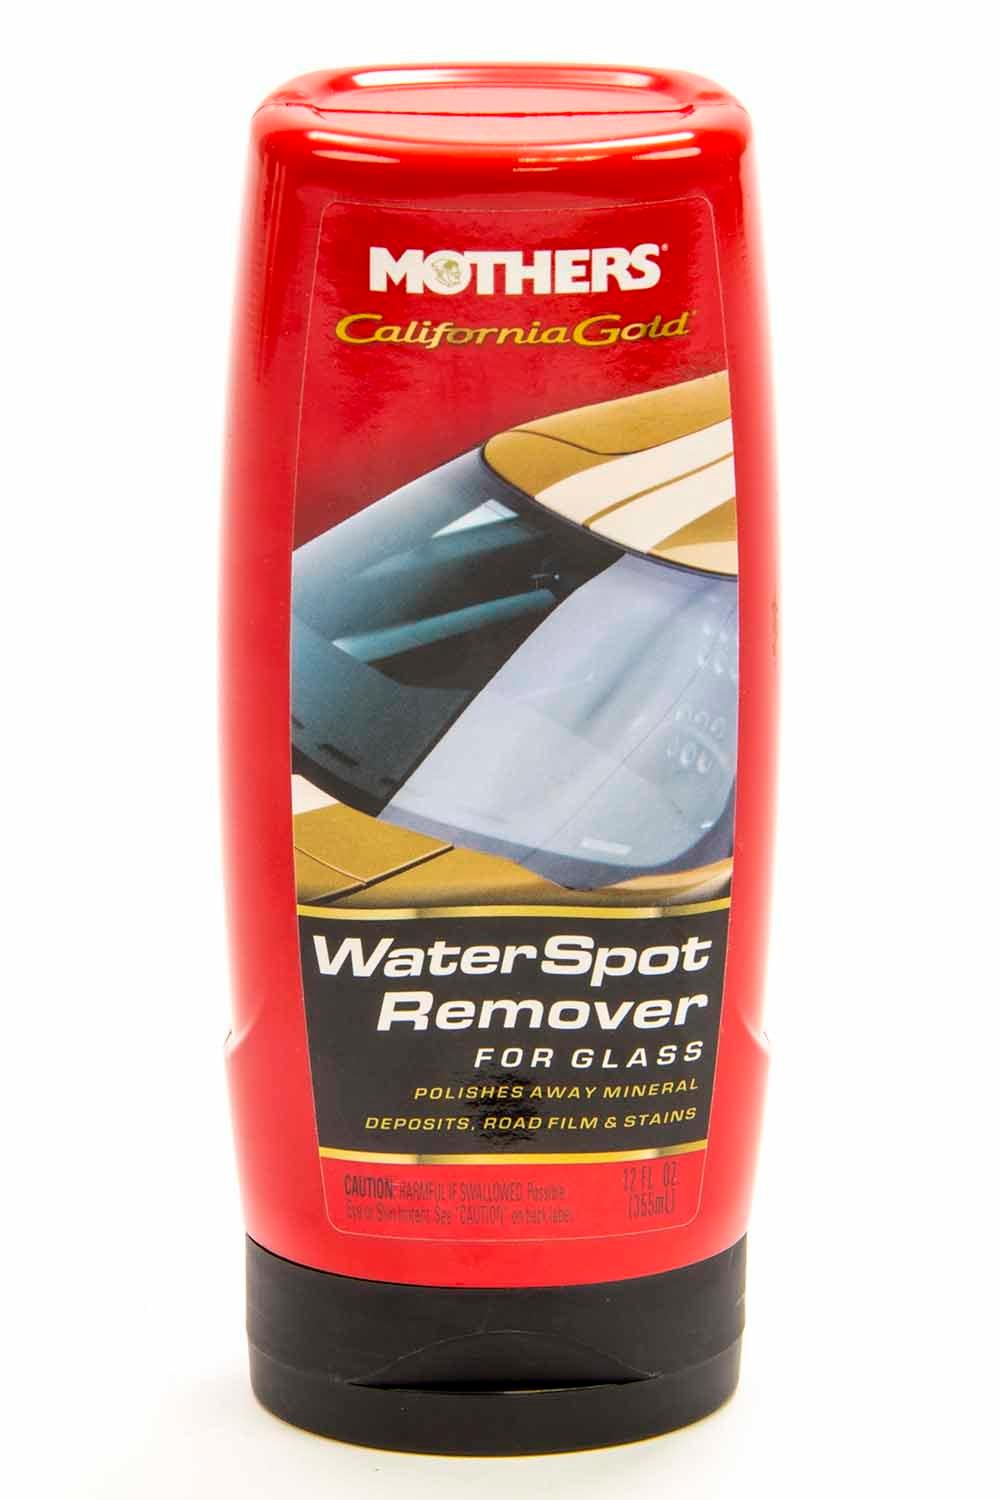 California Gold Water Spot Remover for Glass - Burlile Performance Products